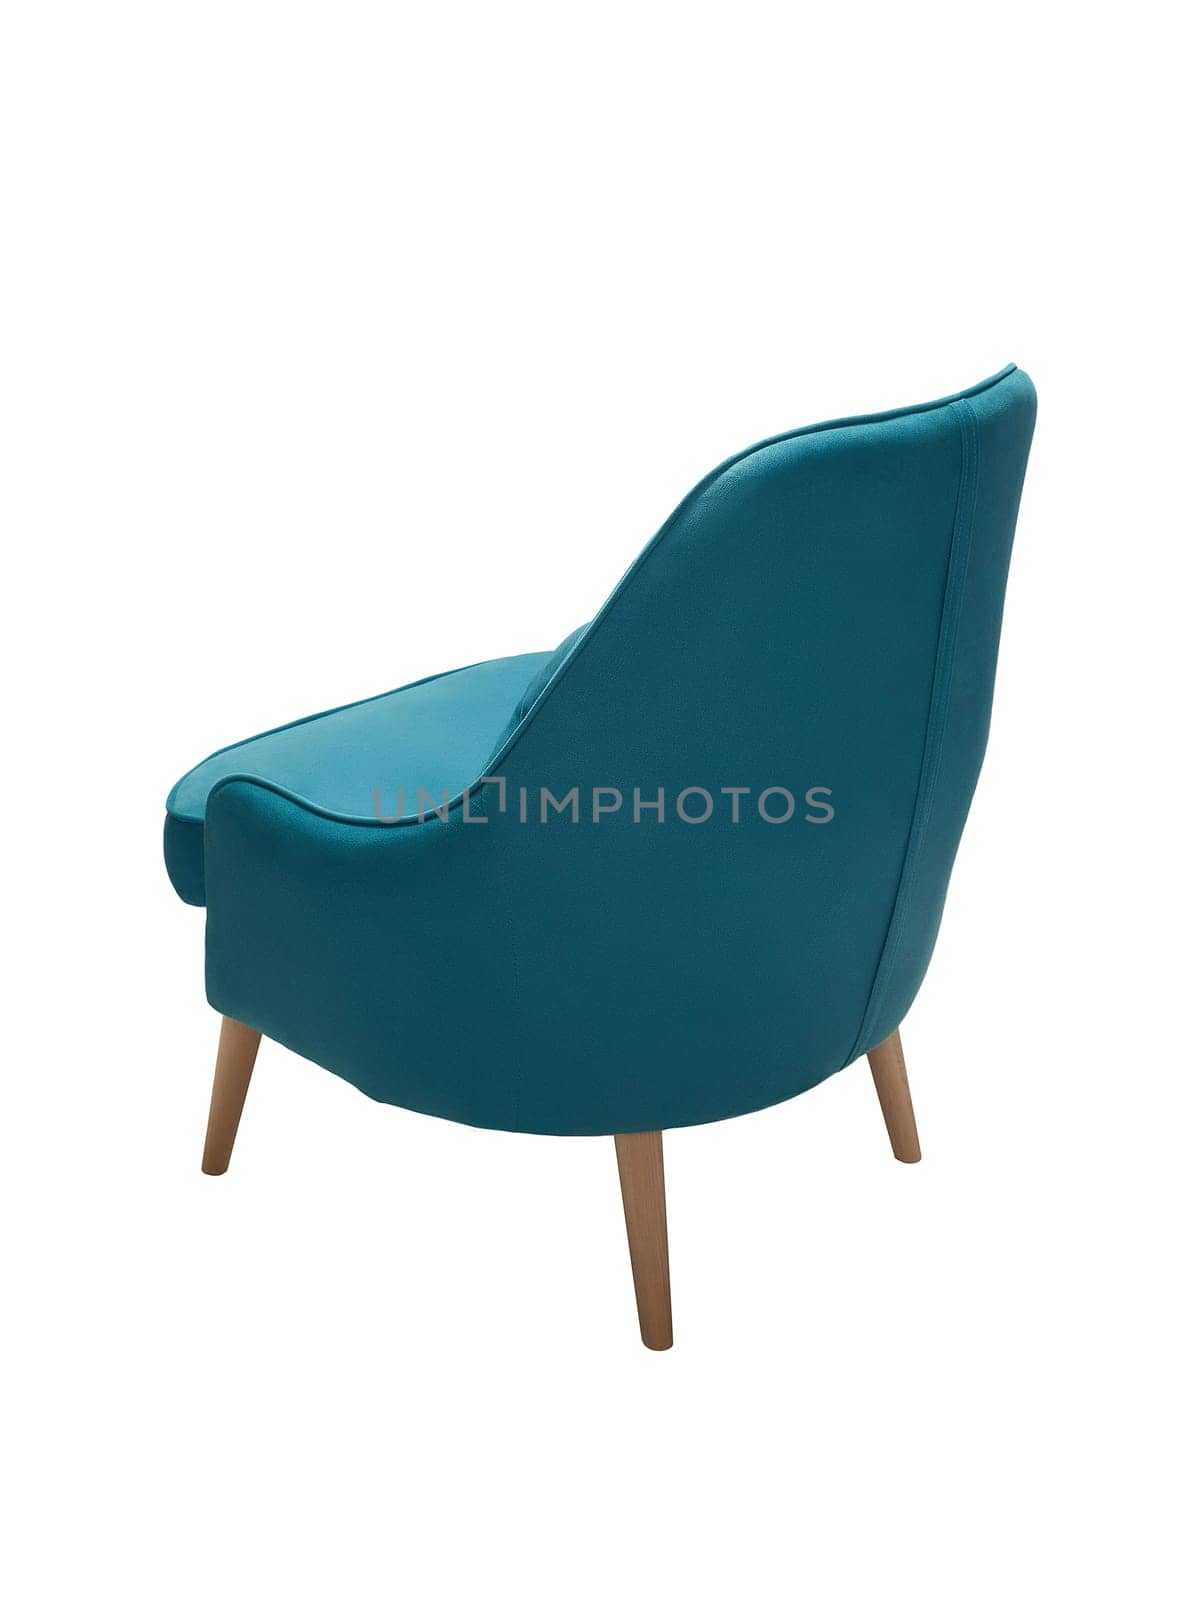 modern blue fabric armchair with wooden legs isolated on white background, back view by artemzatsepilin